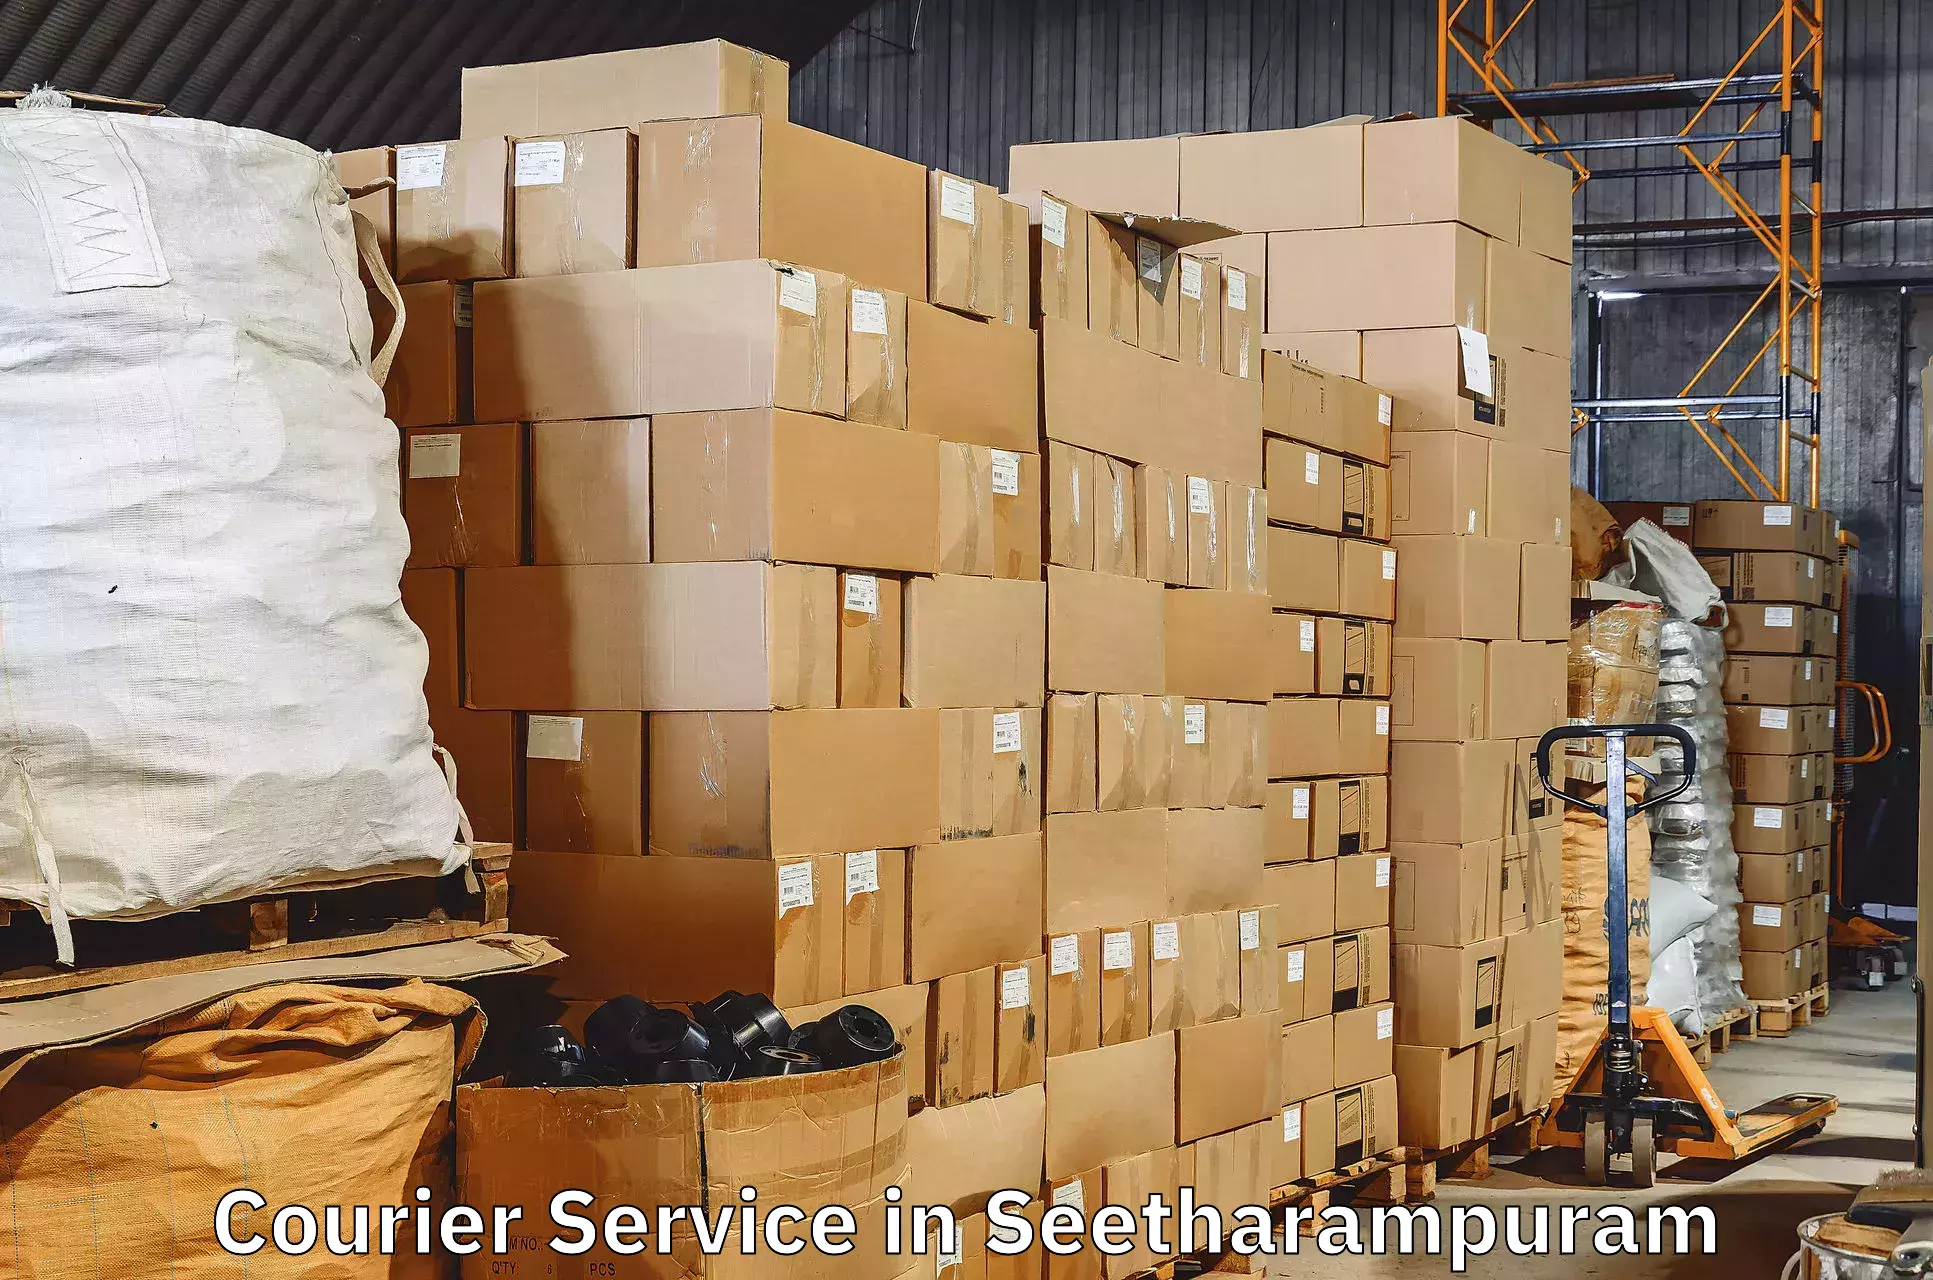 Customer-oriented courier services in Seetharampuram